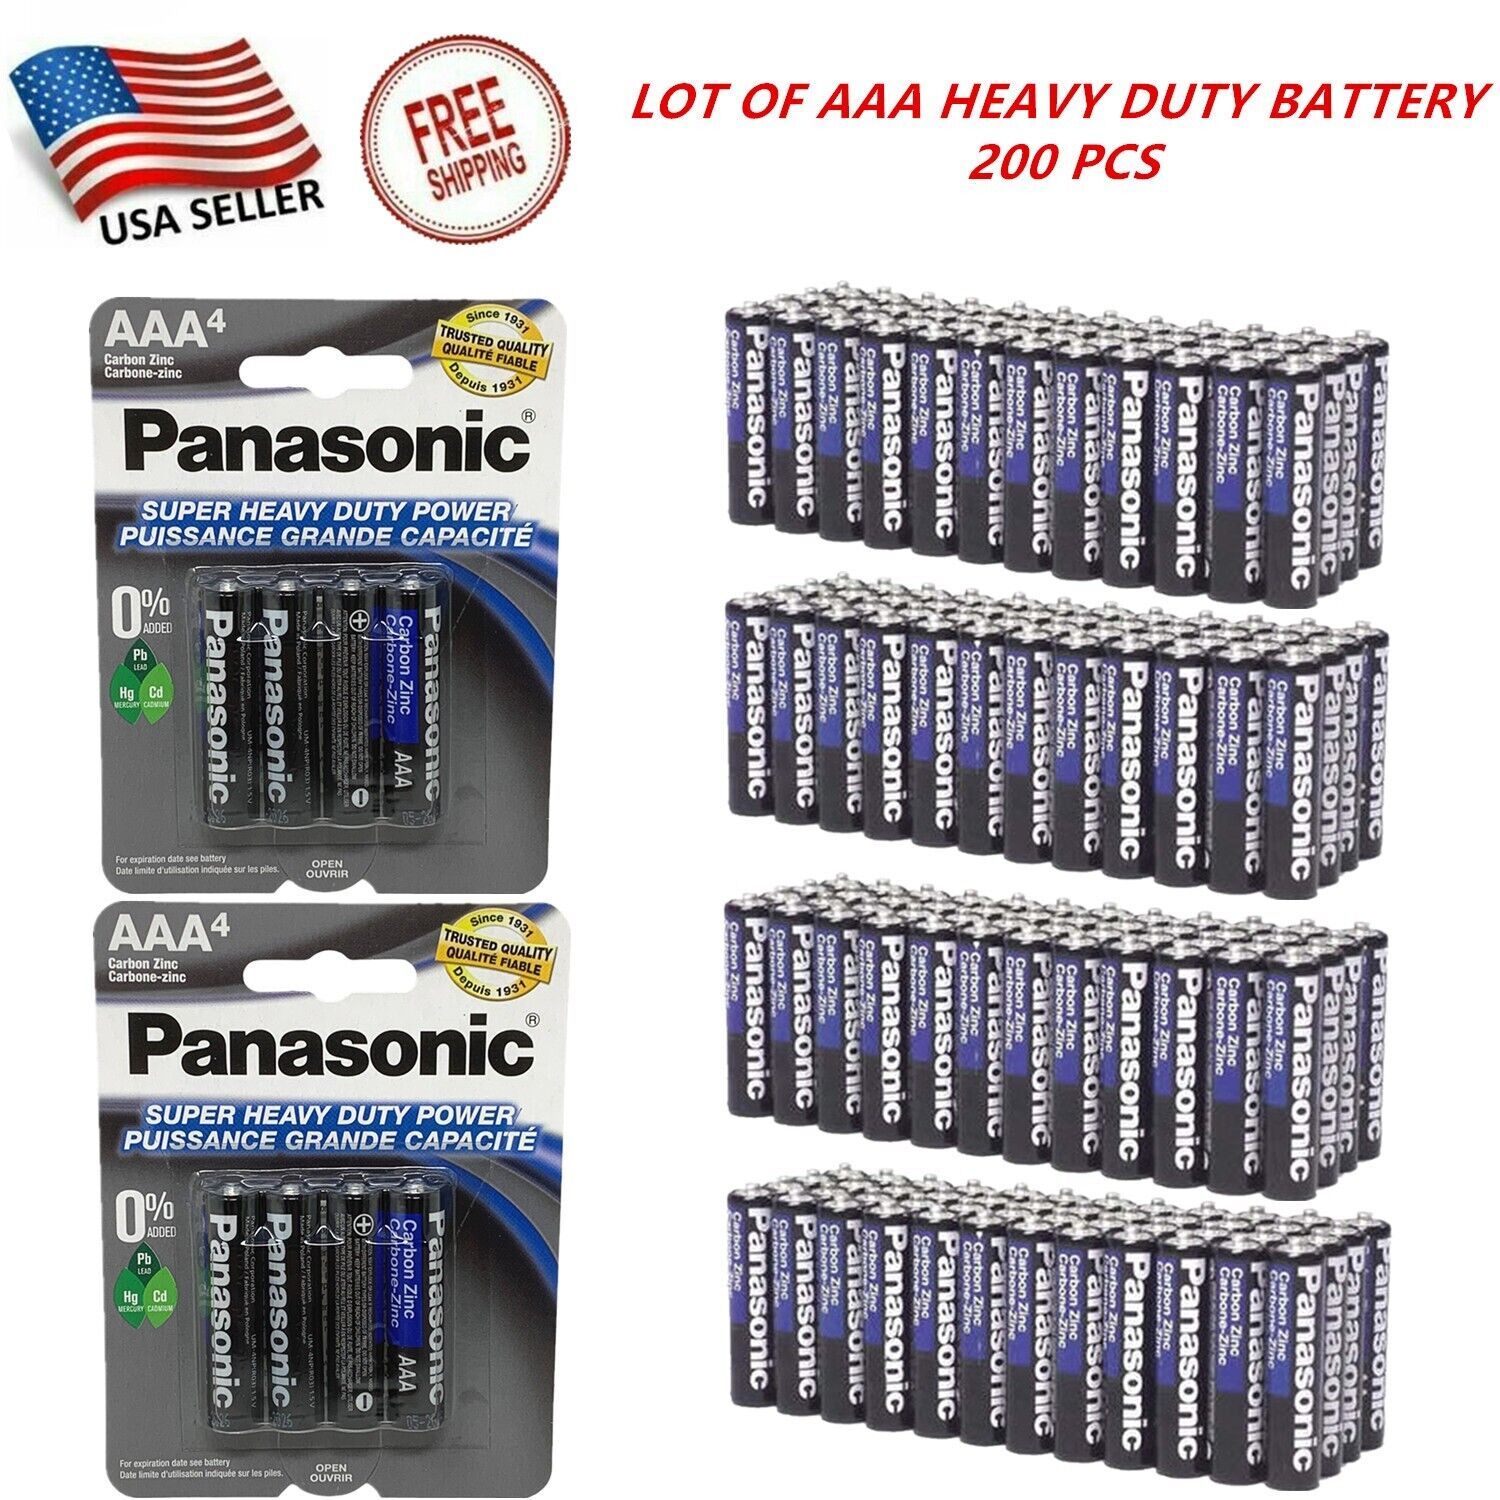 Primary image for WHOLESALE LOT OF 200 PCS of Panasonic AAA Batteries Heavy Duty Power Carbon-Zinc